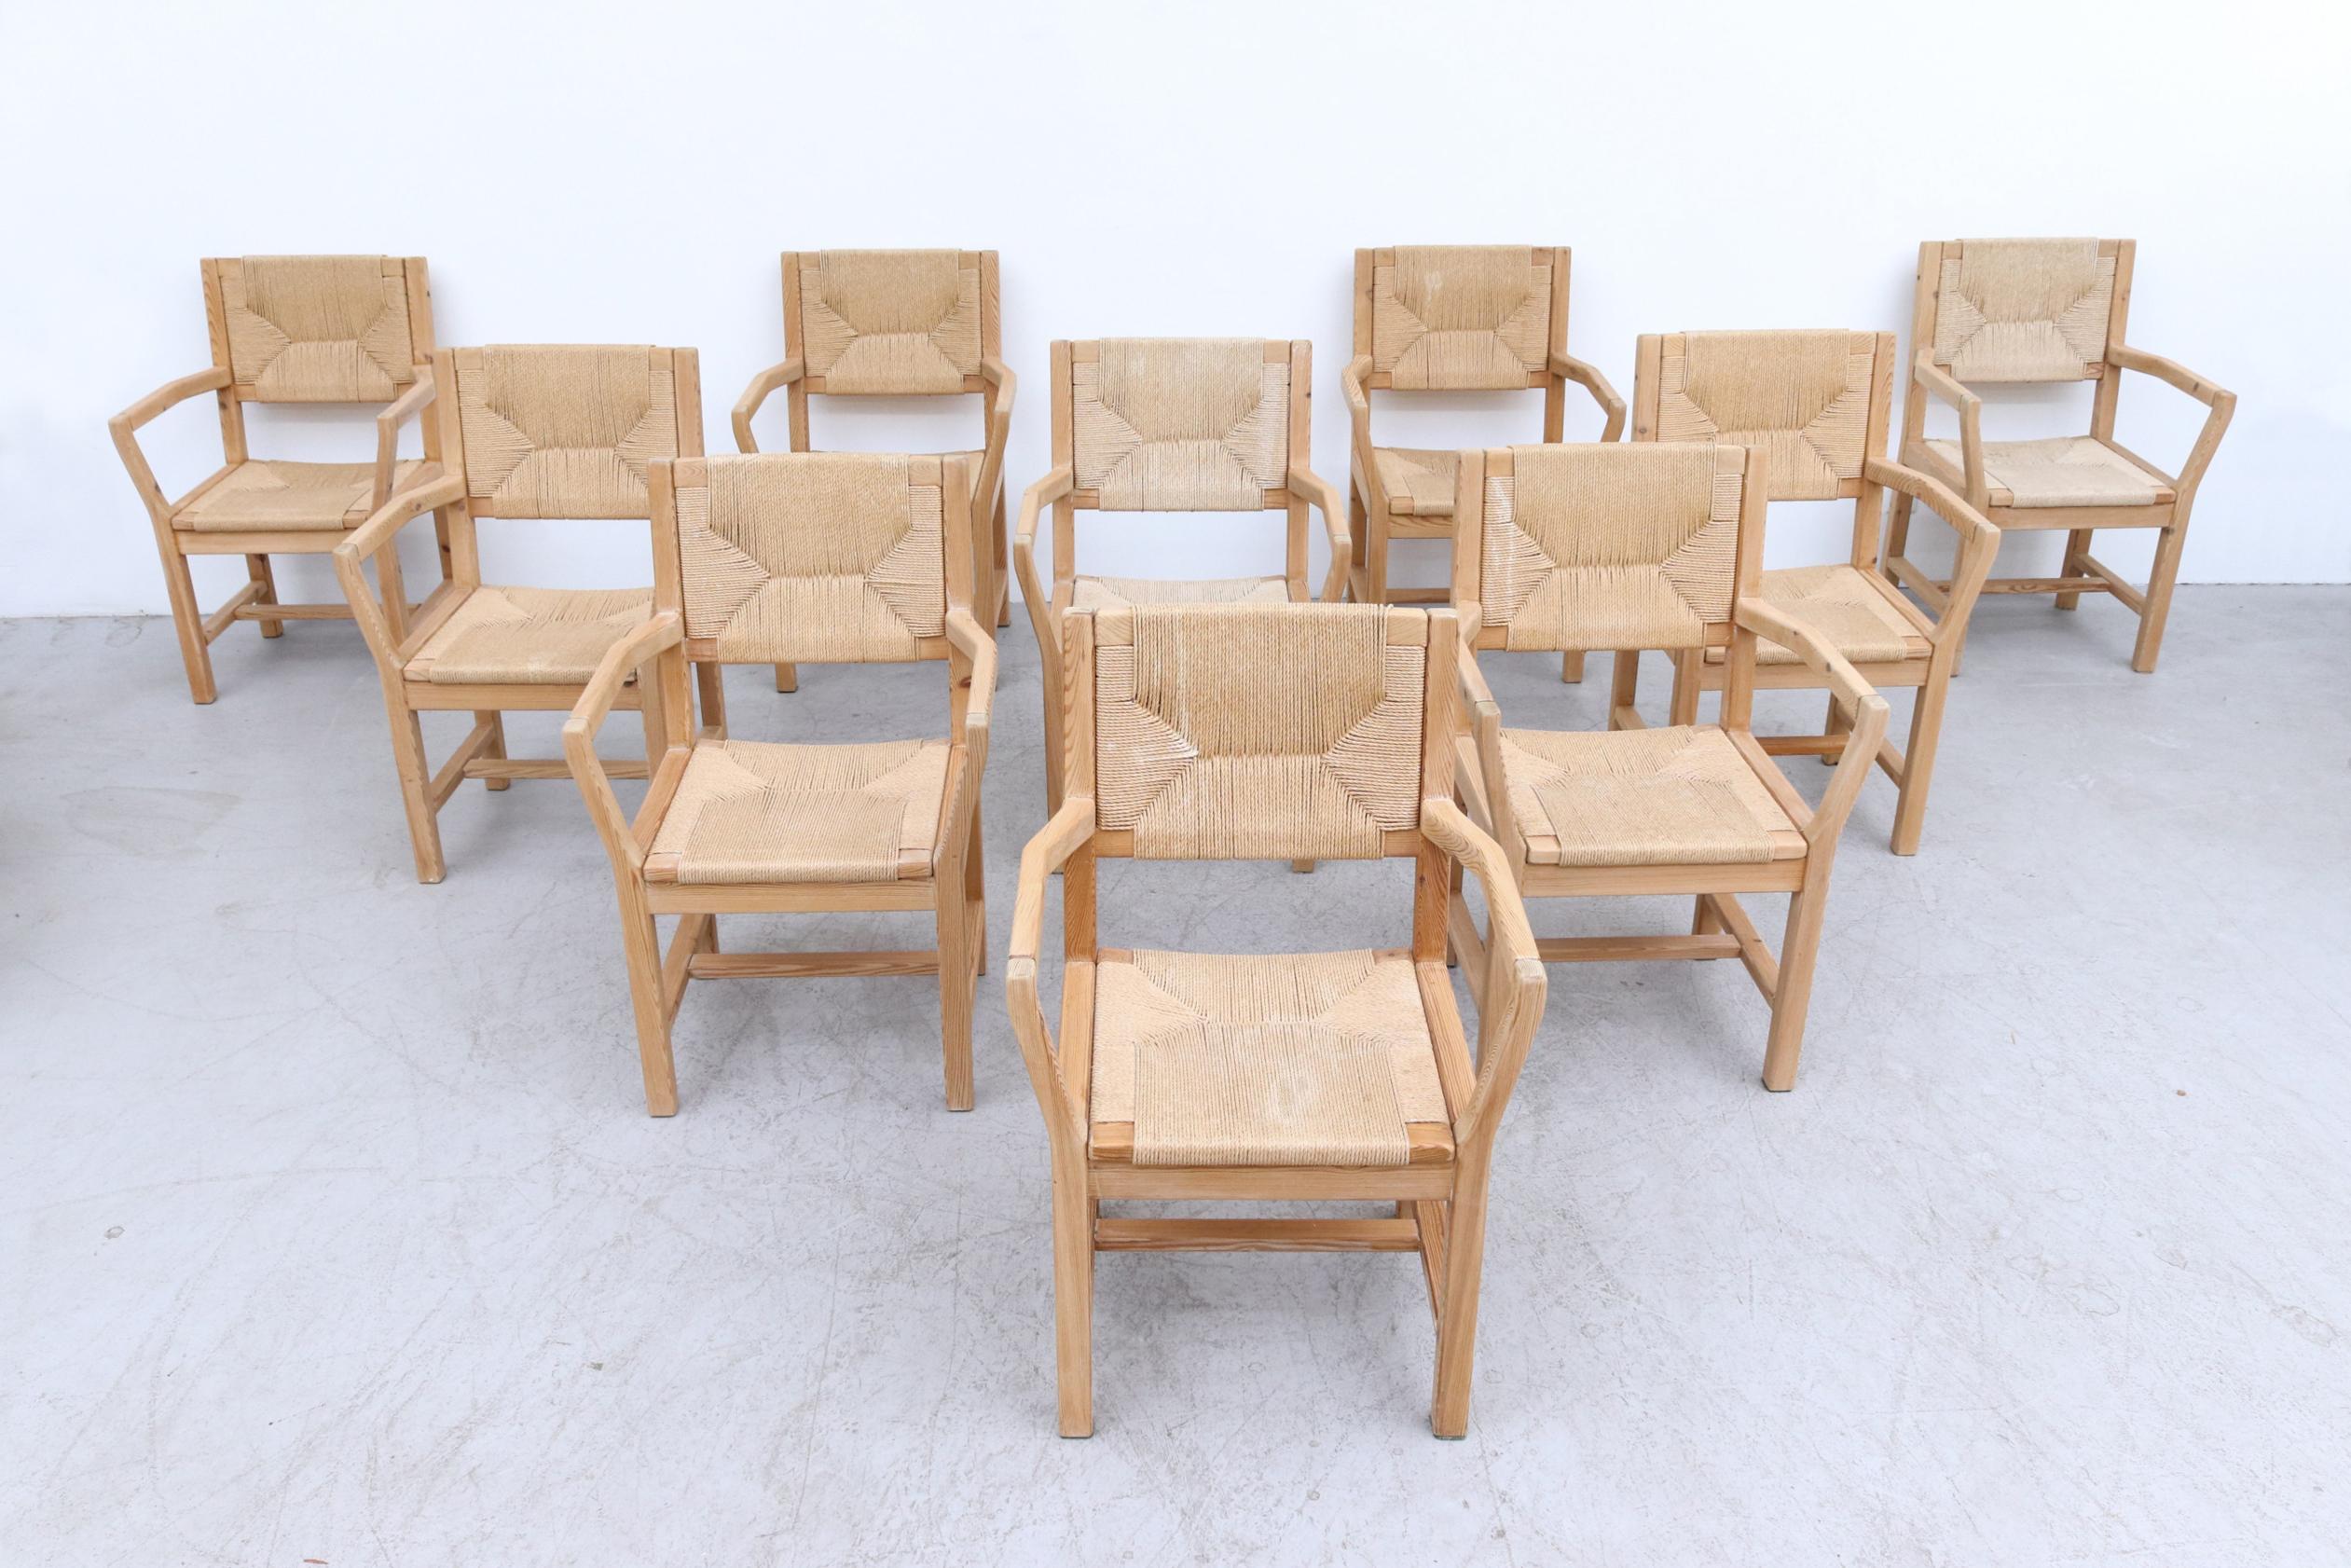 Set of 10 Danish Pine and Papercord Arm Chairs by T. Poulsen for Gm Mobler 1